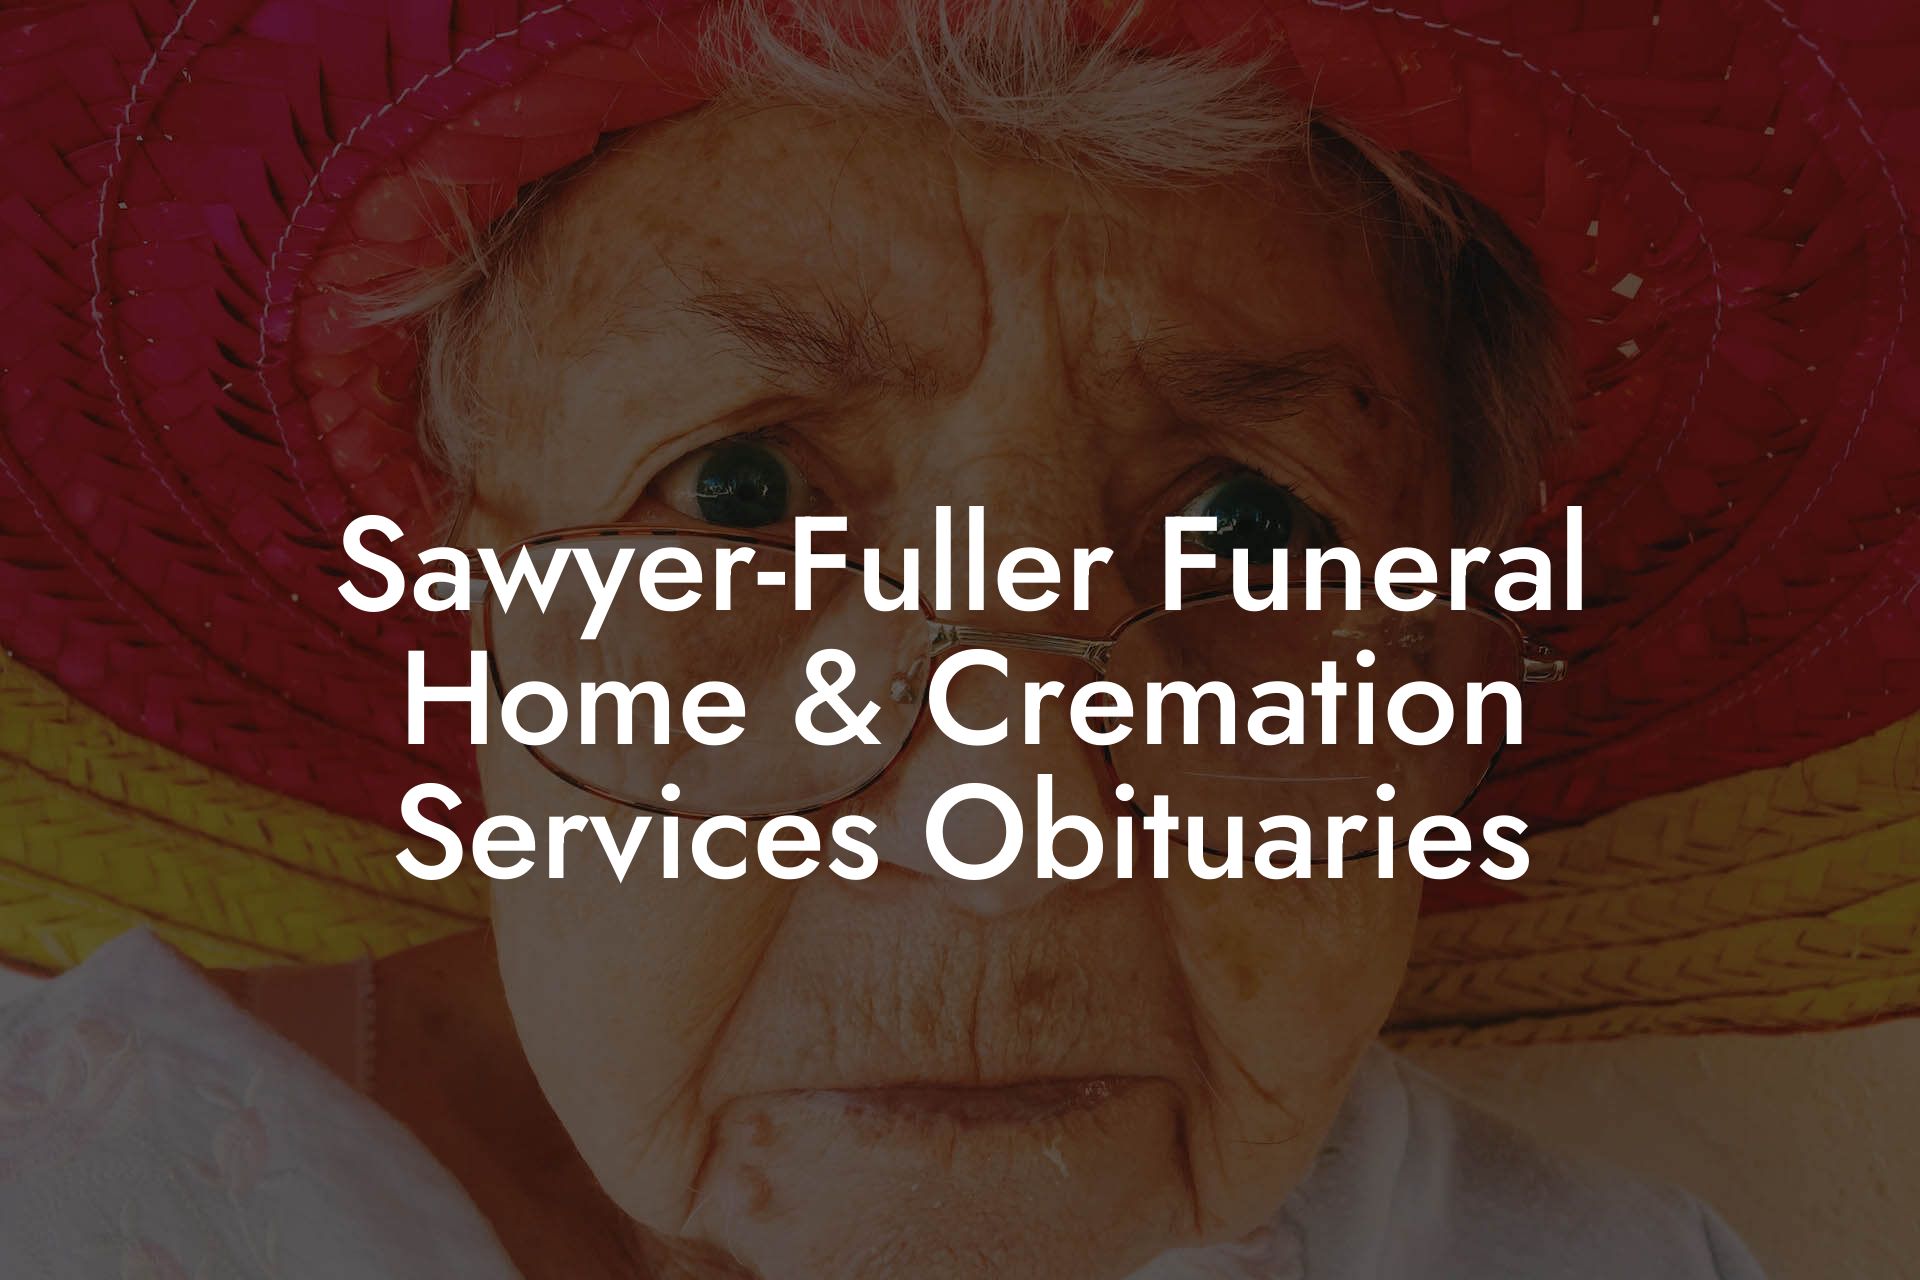 Sawyer-Fuller Funeral Home & Cremation Services Obituaries